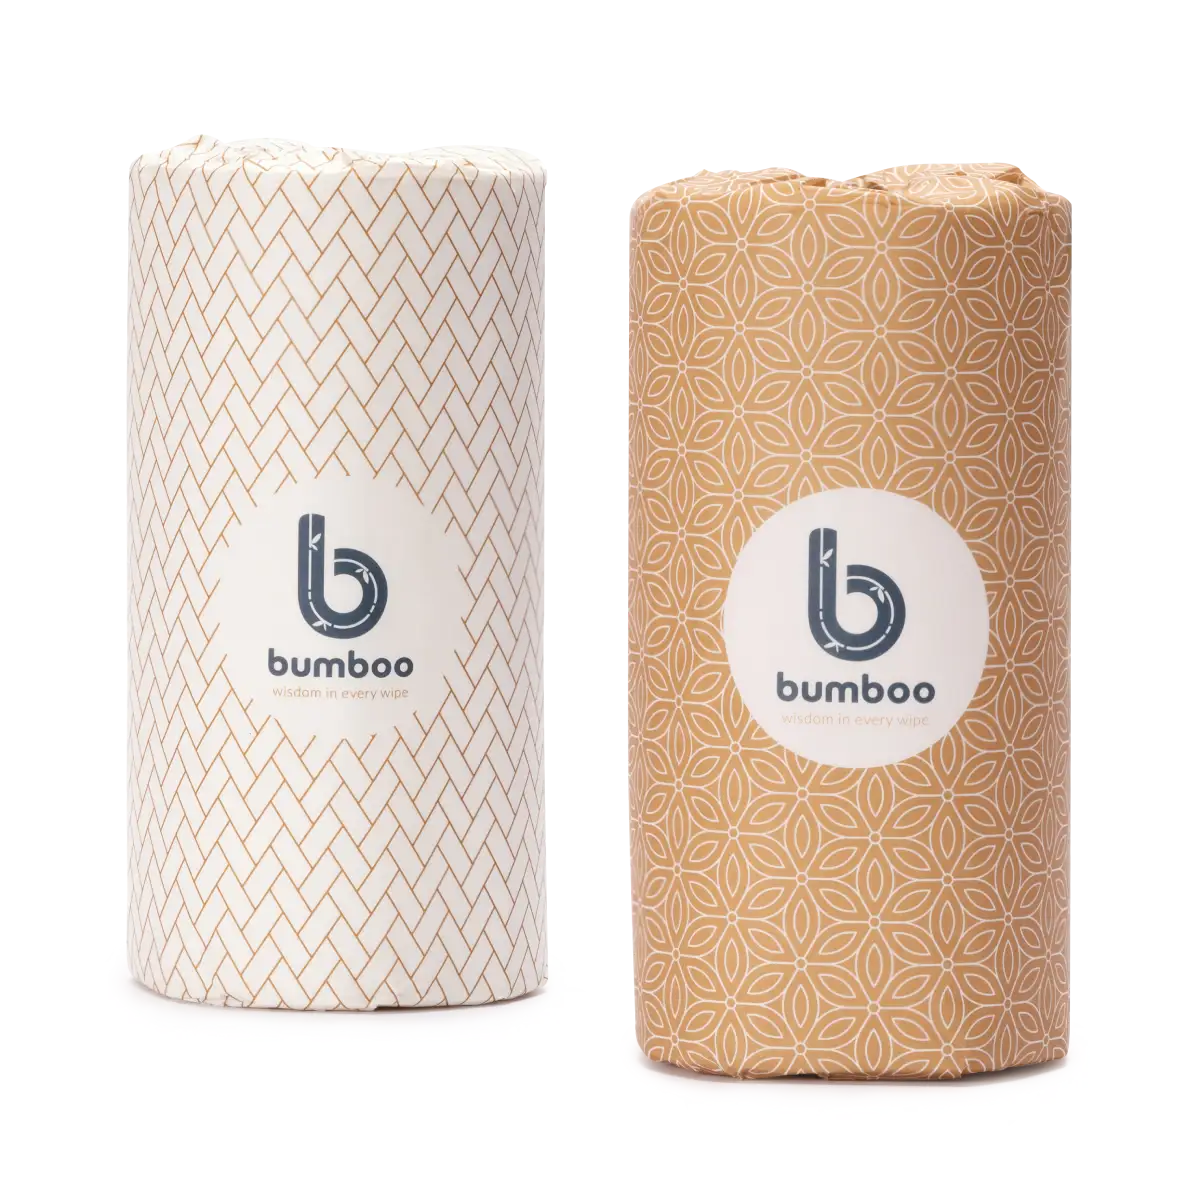 white-and-gold-bamboo-bumboo-toilet-paper-wrapped